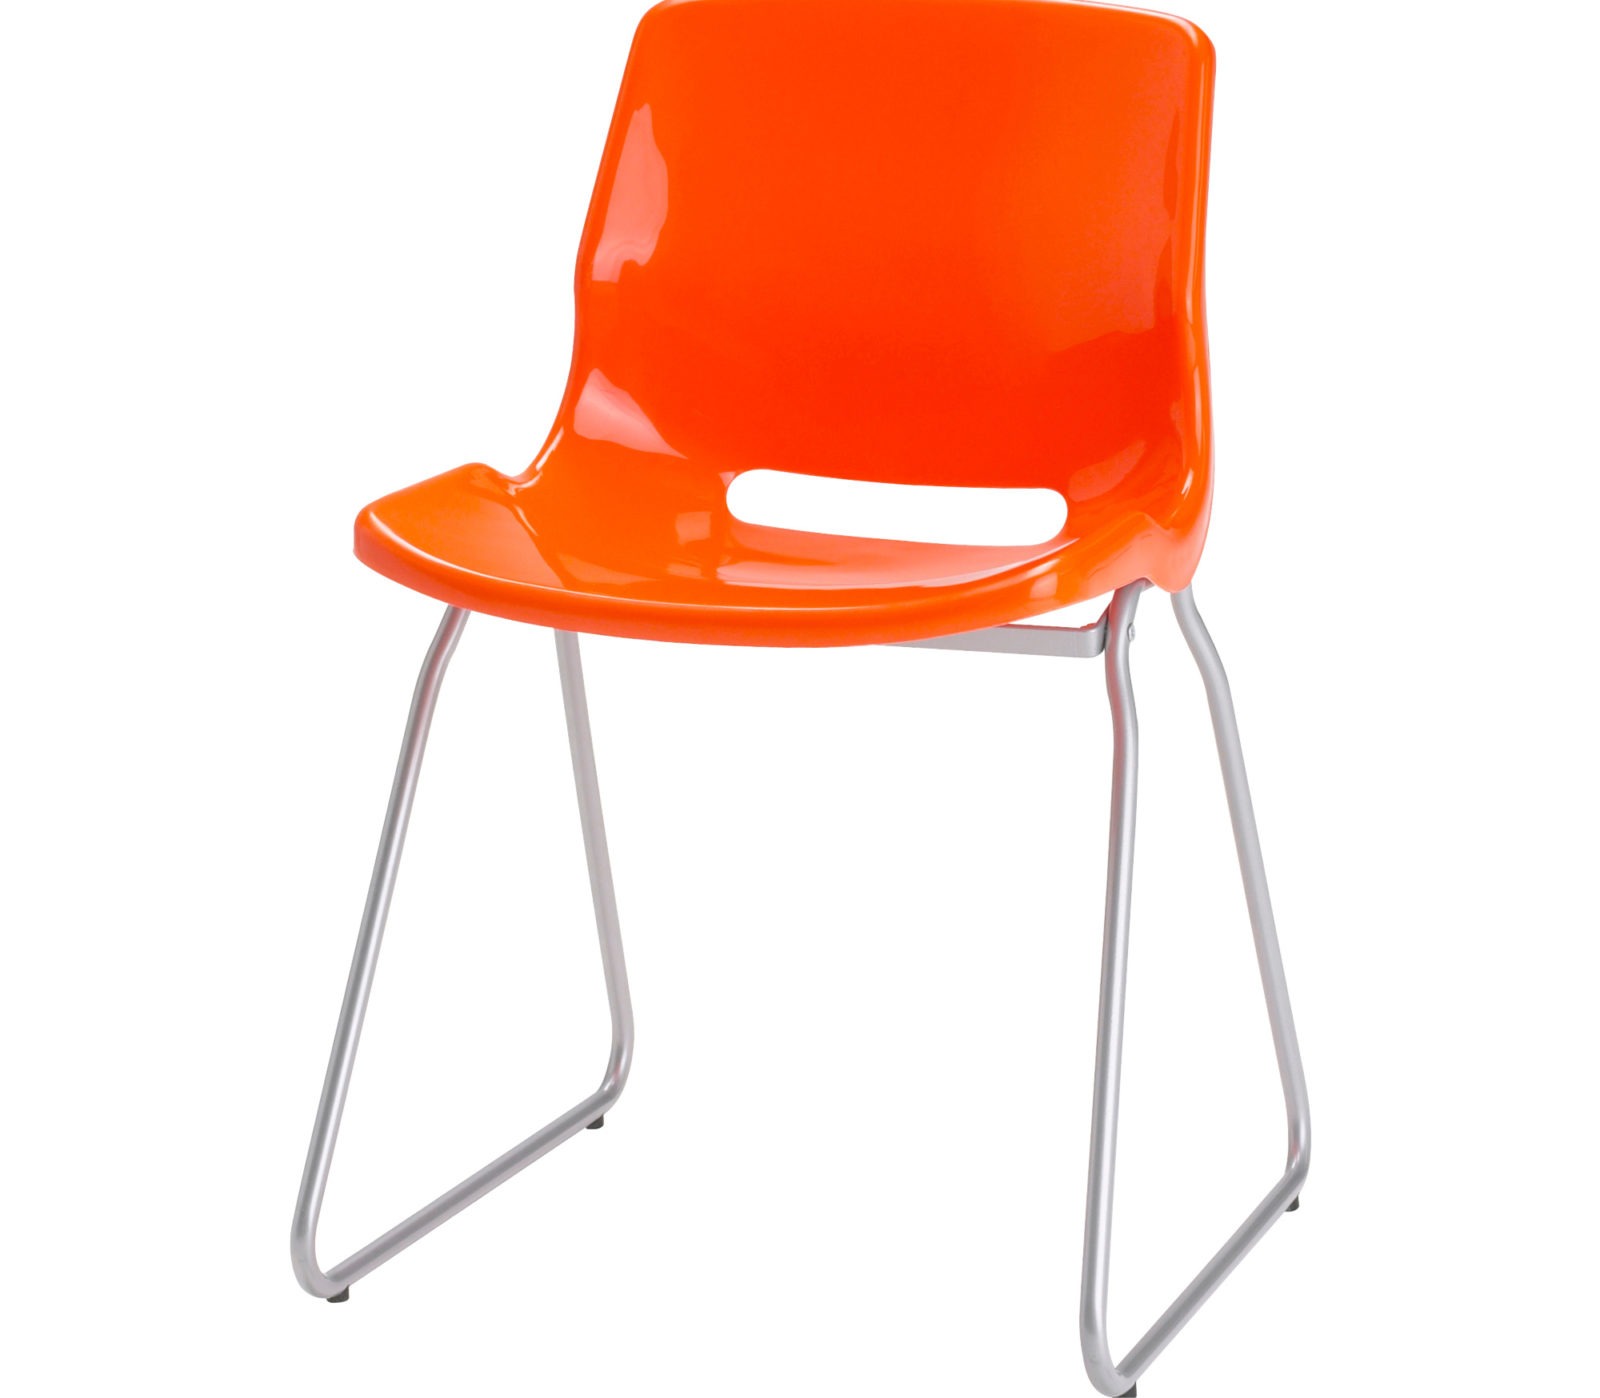 Stackable simple chair with metal base and orange plastic seat, SNILLE.